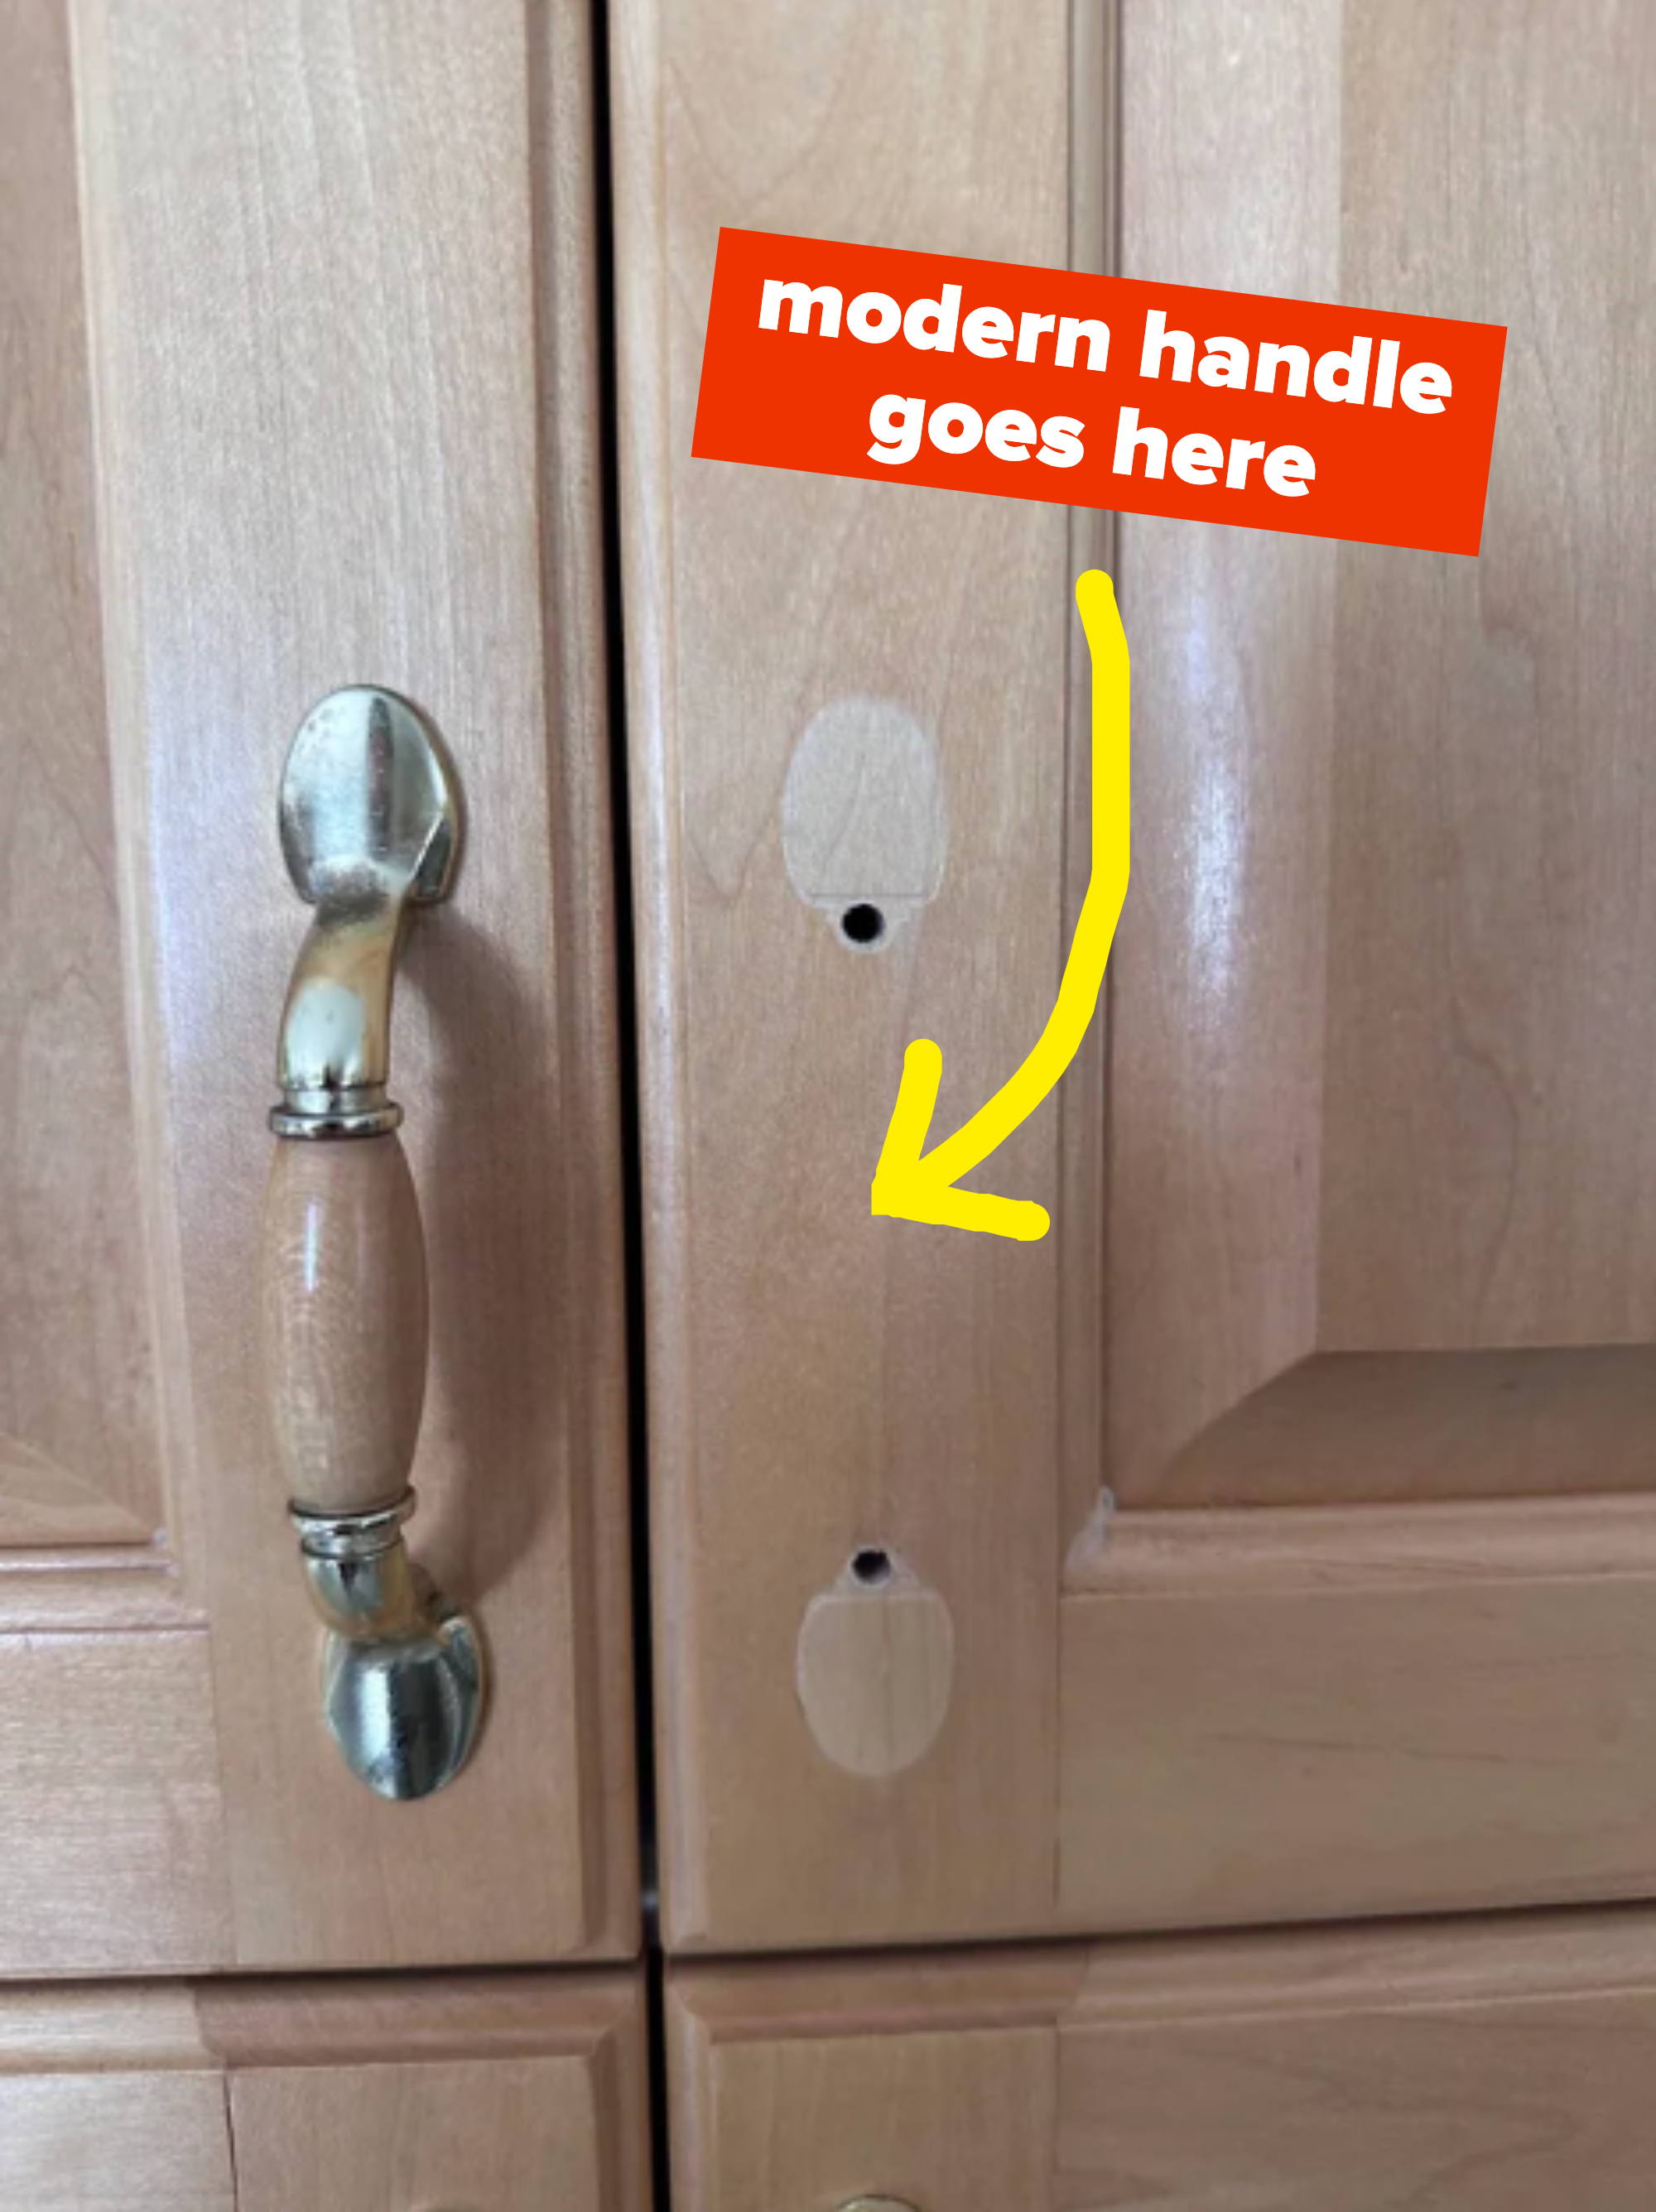 missing cabinet handle with text saying modern handle goes here